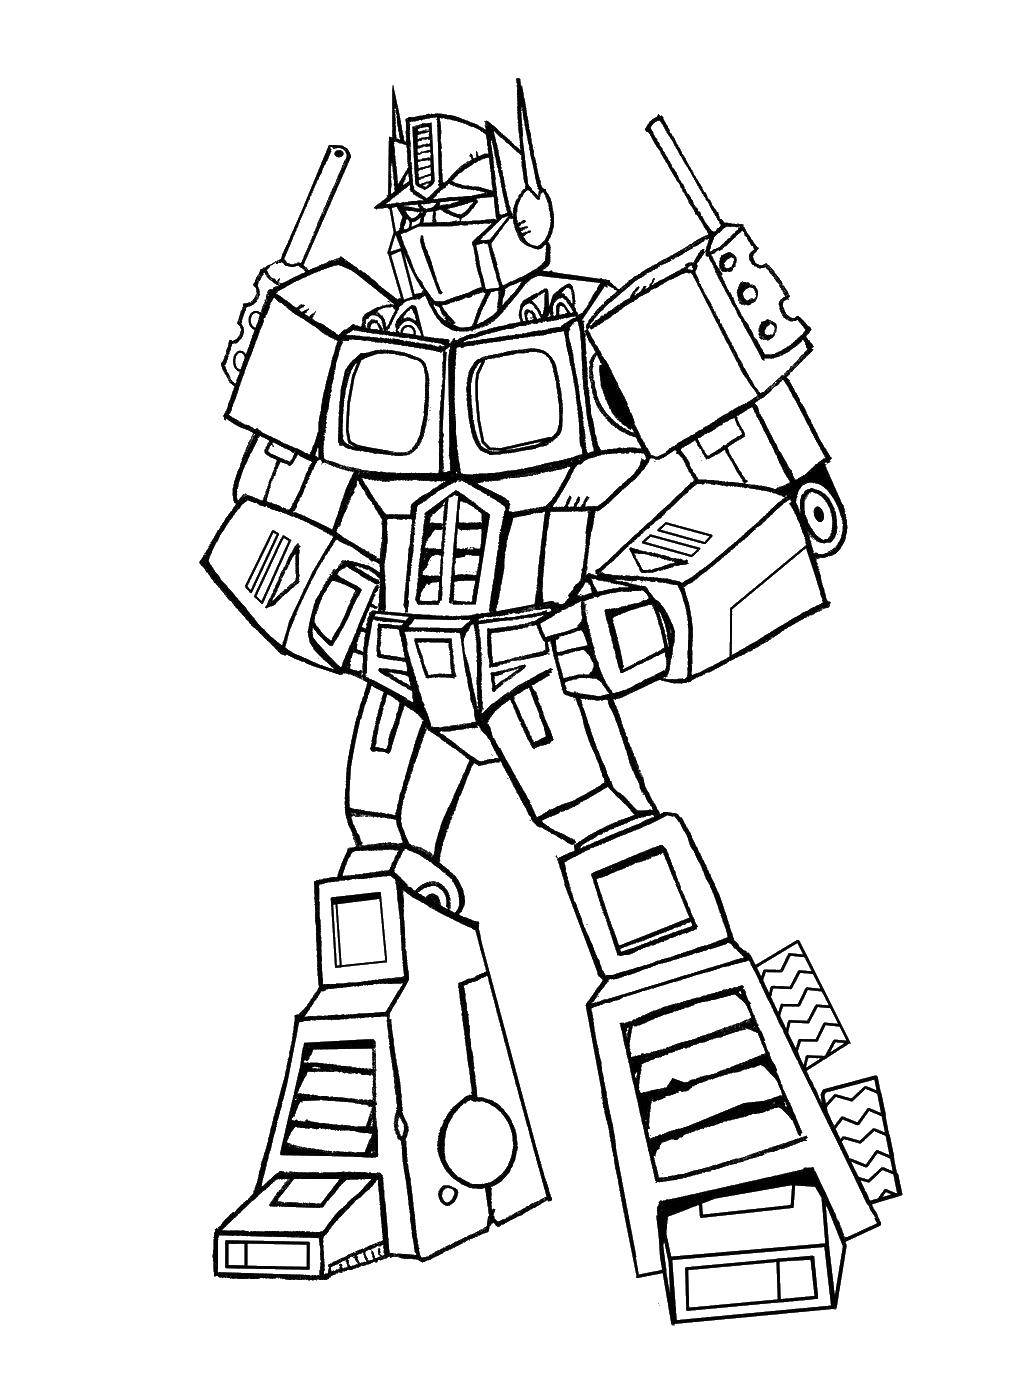 Coloring Terrible robot. Category For boys . Tags:  Robot.